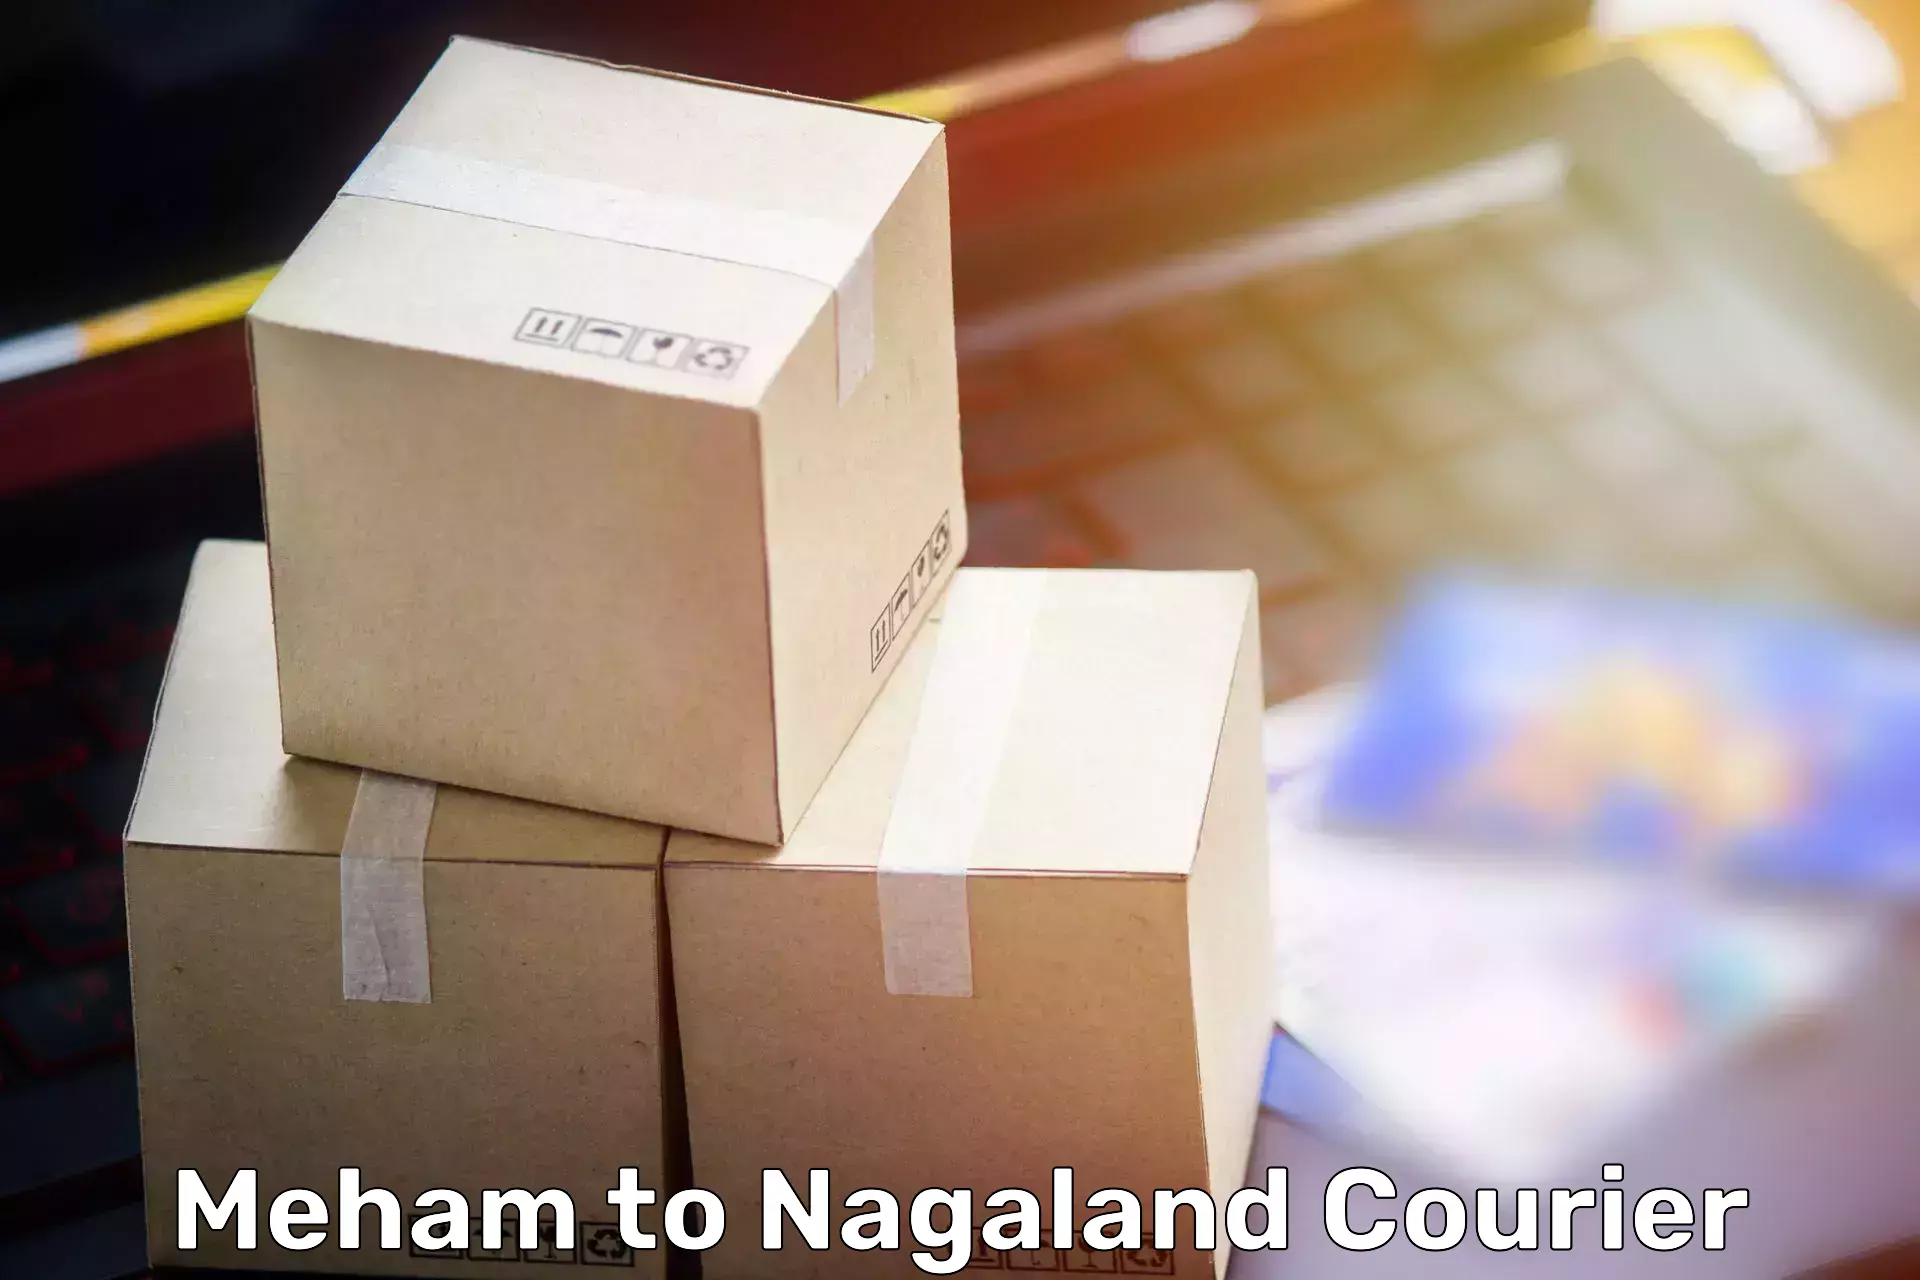 Furniture moving service in Meham to Nagaland